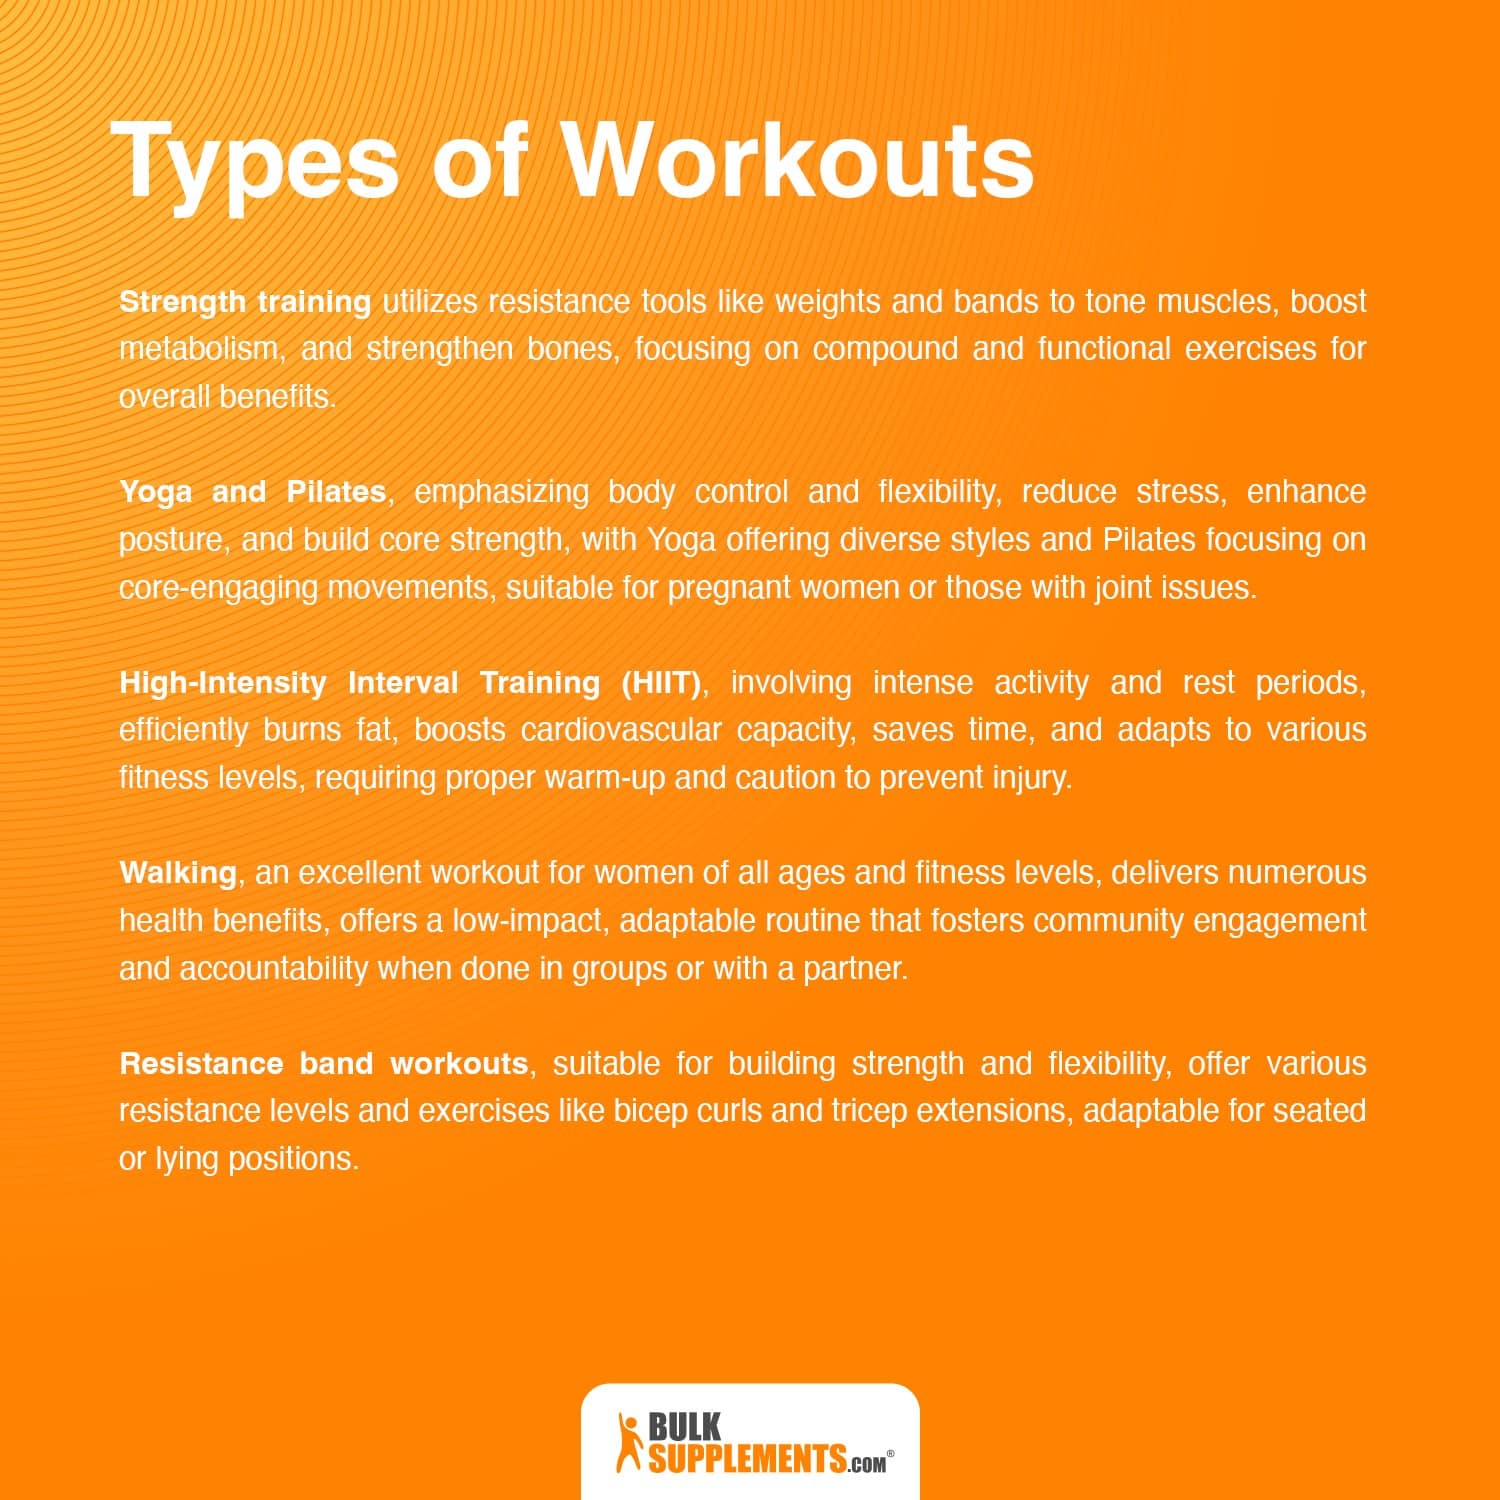 types of workouts for women